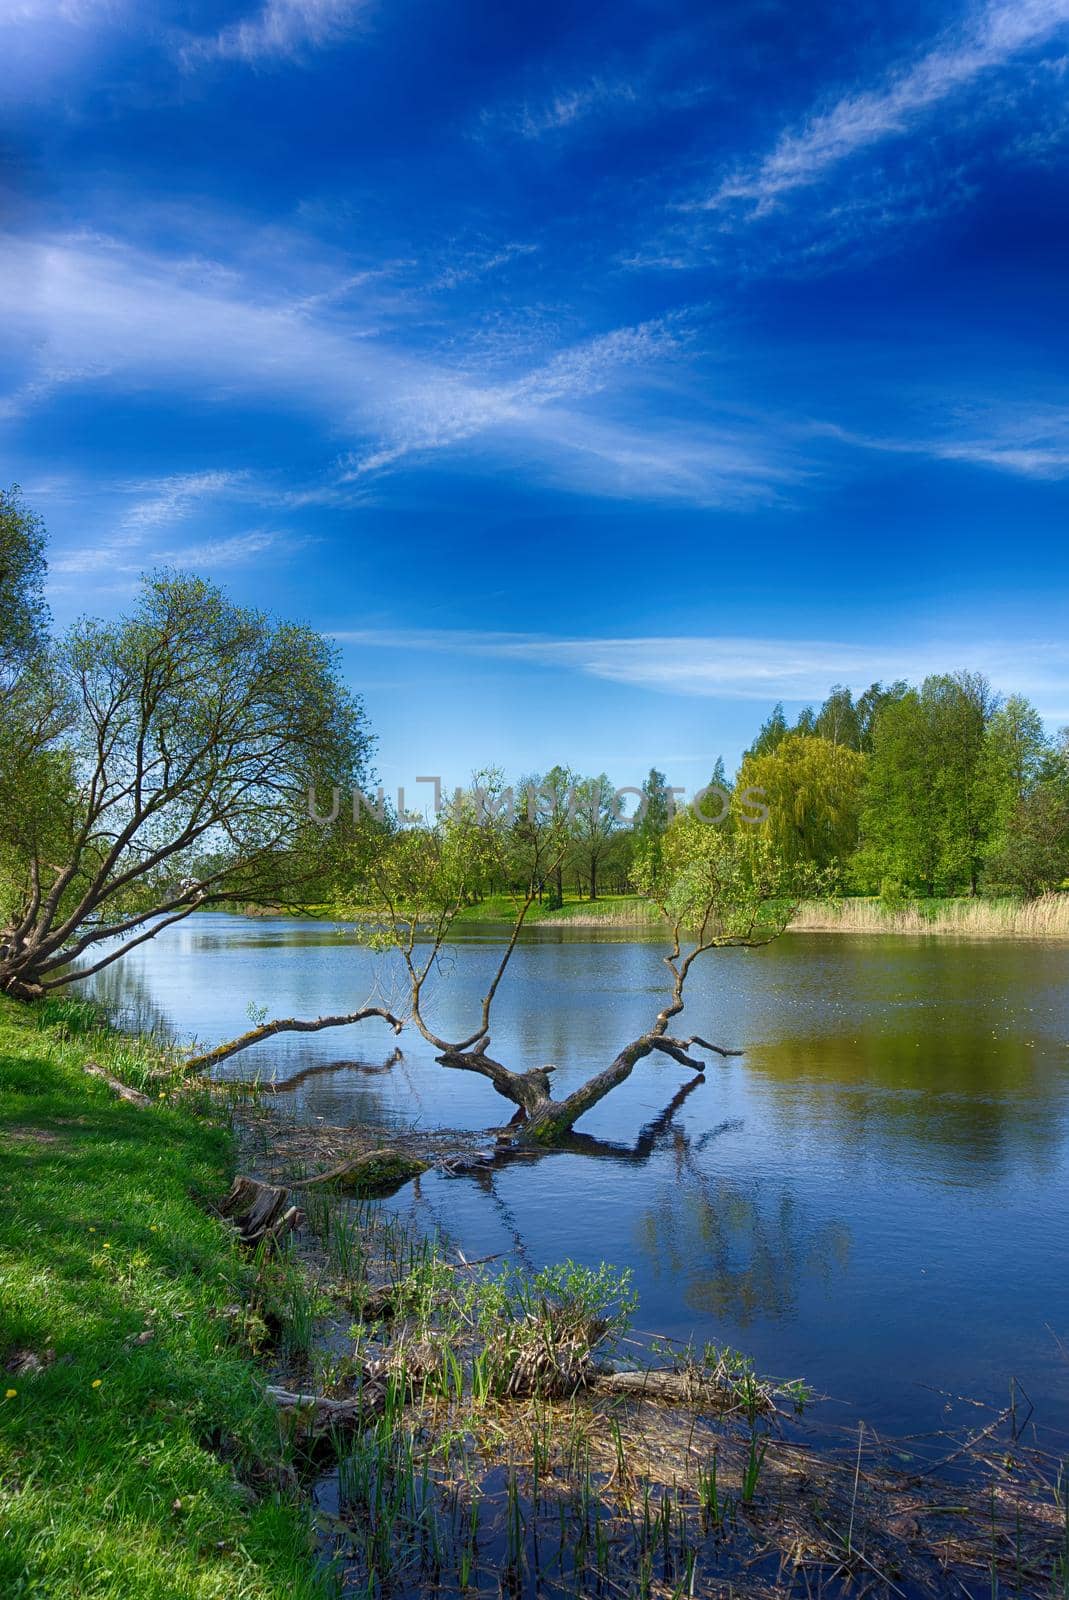 Old submerged tree in a tranquil river in spring by NetPix